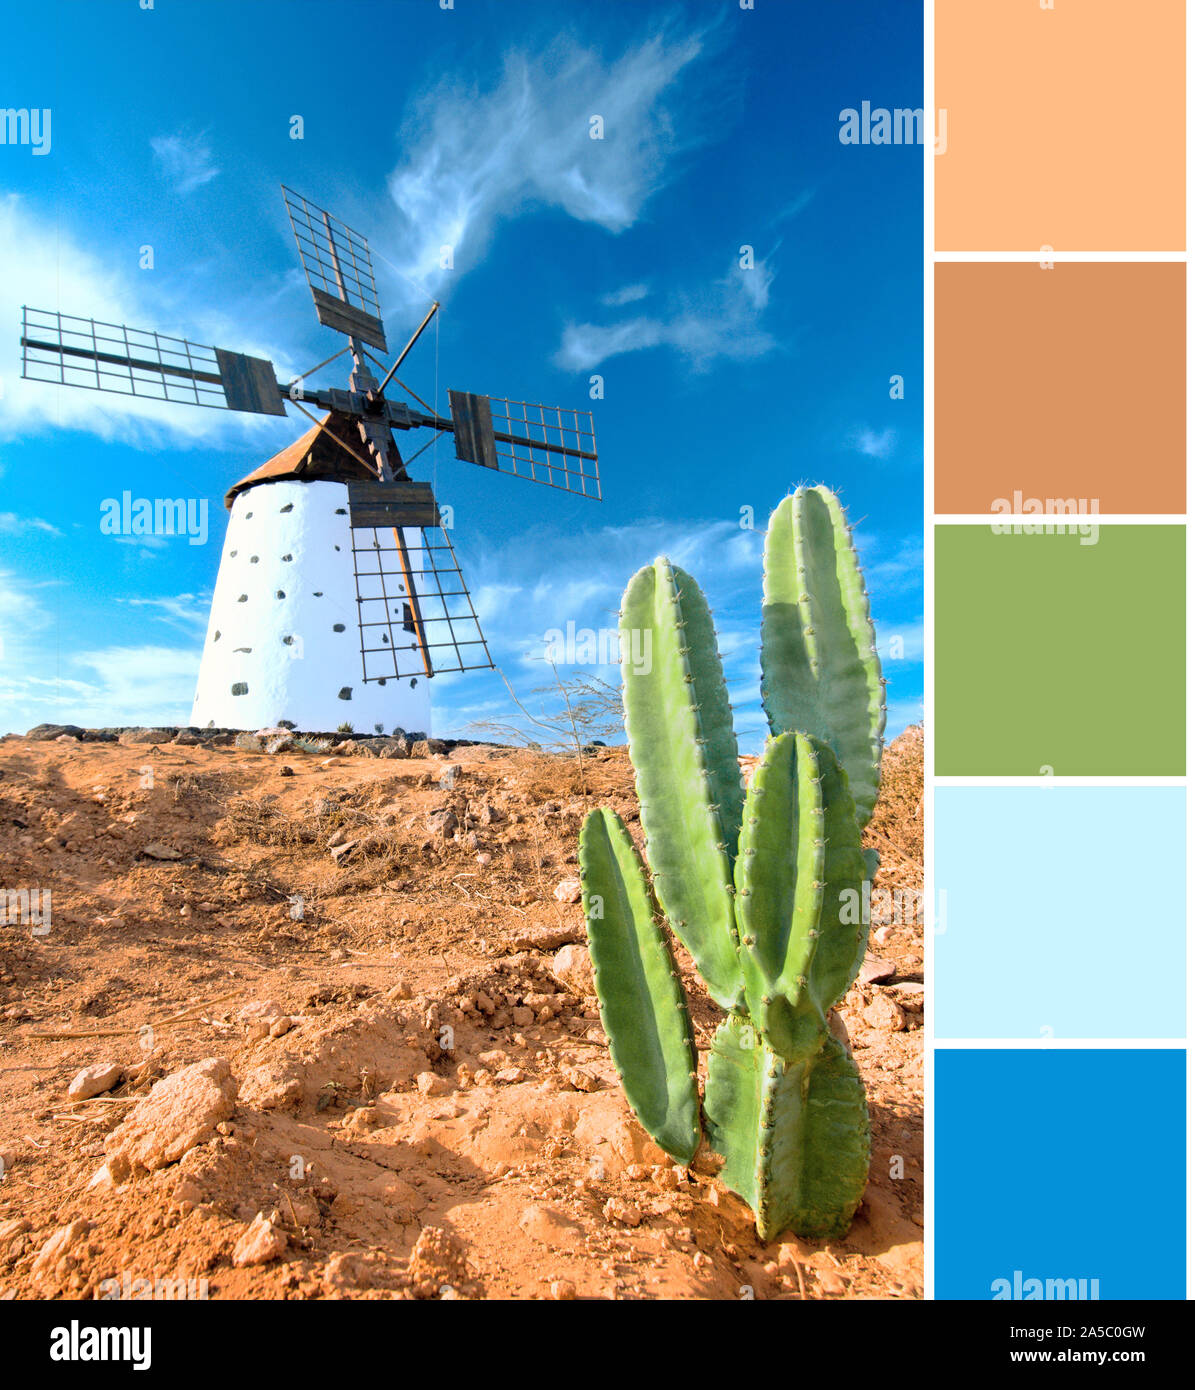 Color matching complementary palette from travel image of wild cactus and traditional windmill on Fuerteventura, Canary islands, Spain Stock Photo